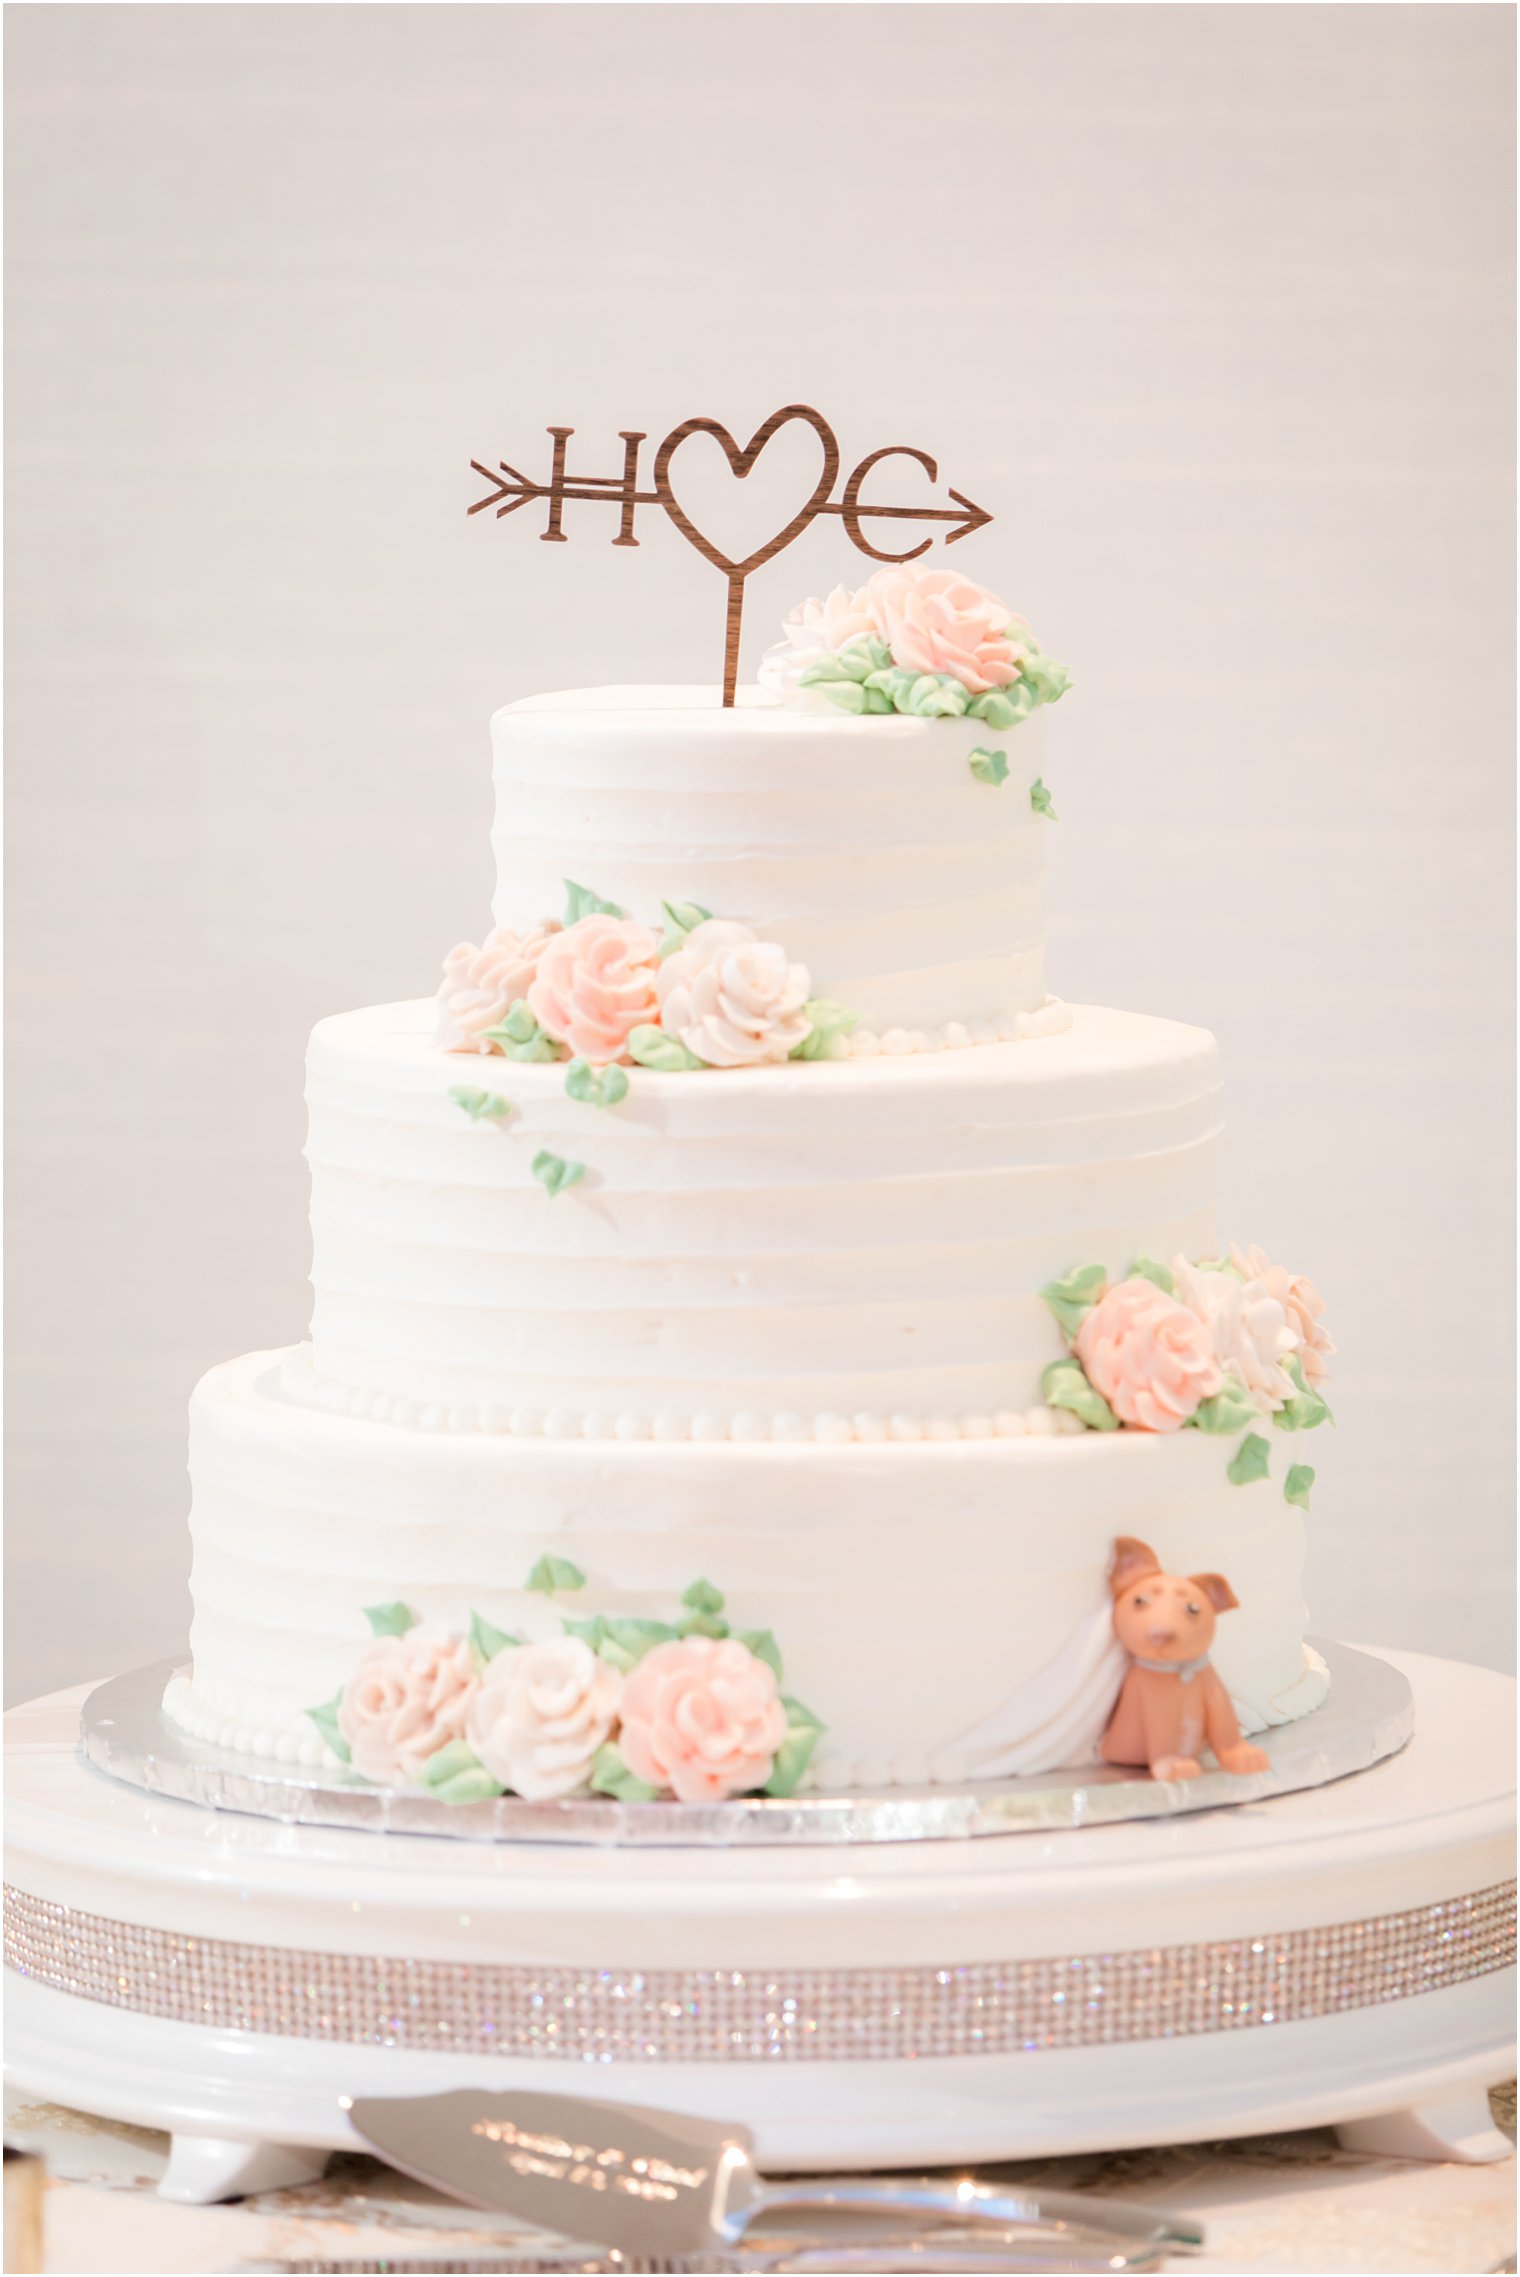 Wedding cake with doggy by Cake Carousel